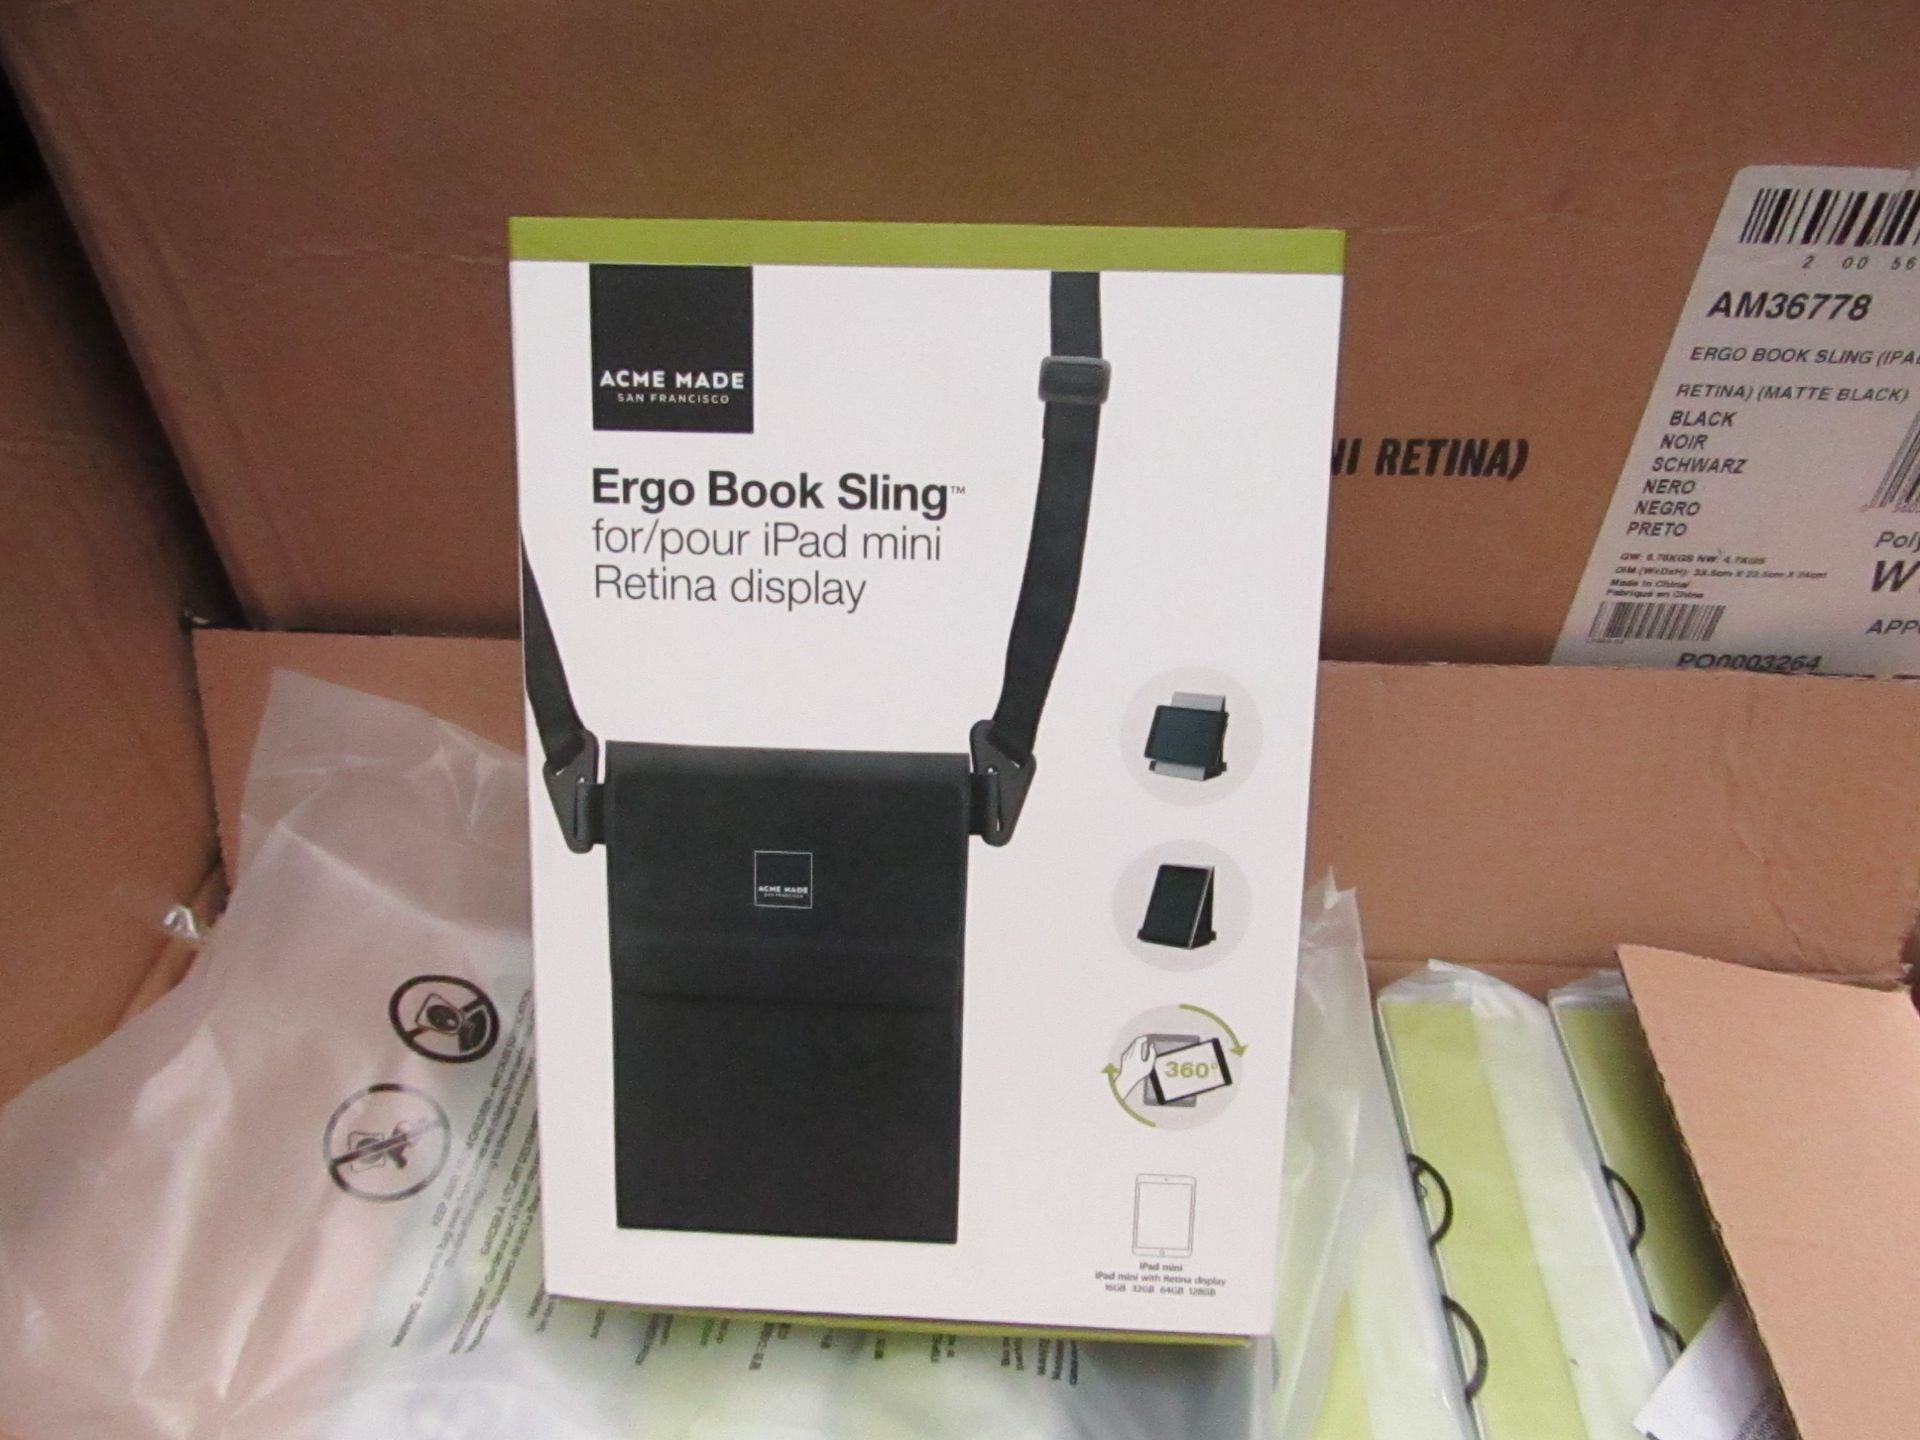 Box of 10 Acme made Ipad Mini Sling/Holder. New & packaged